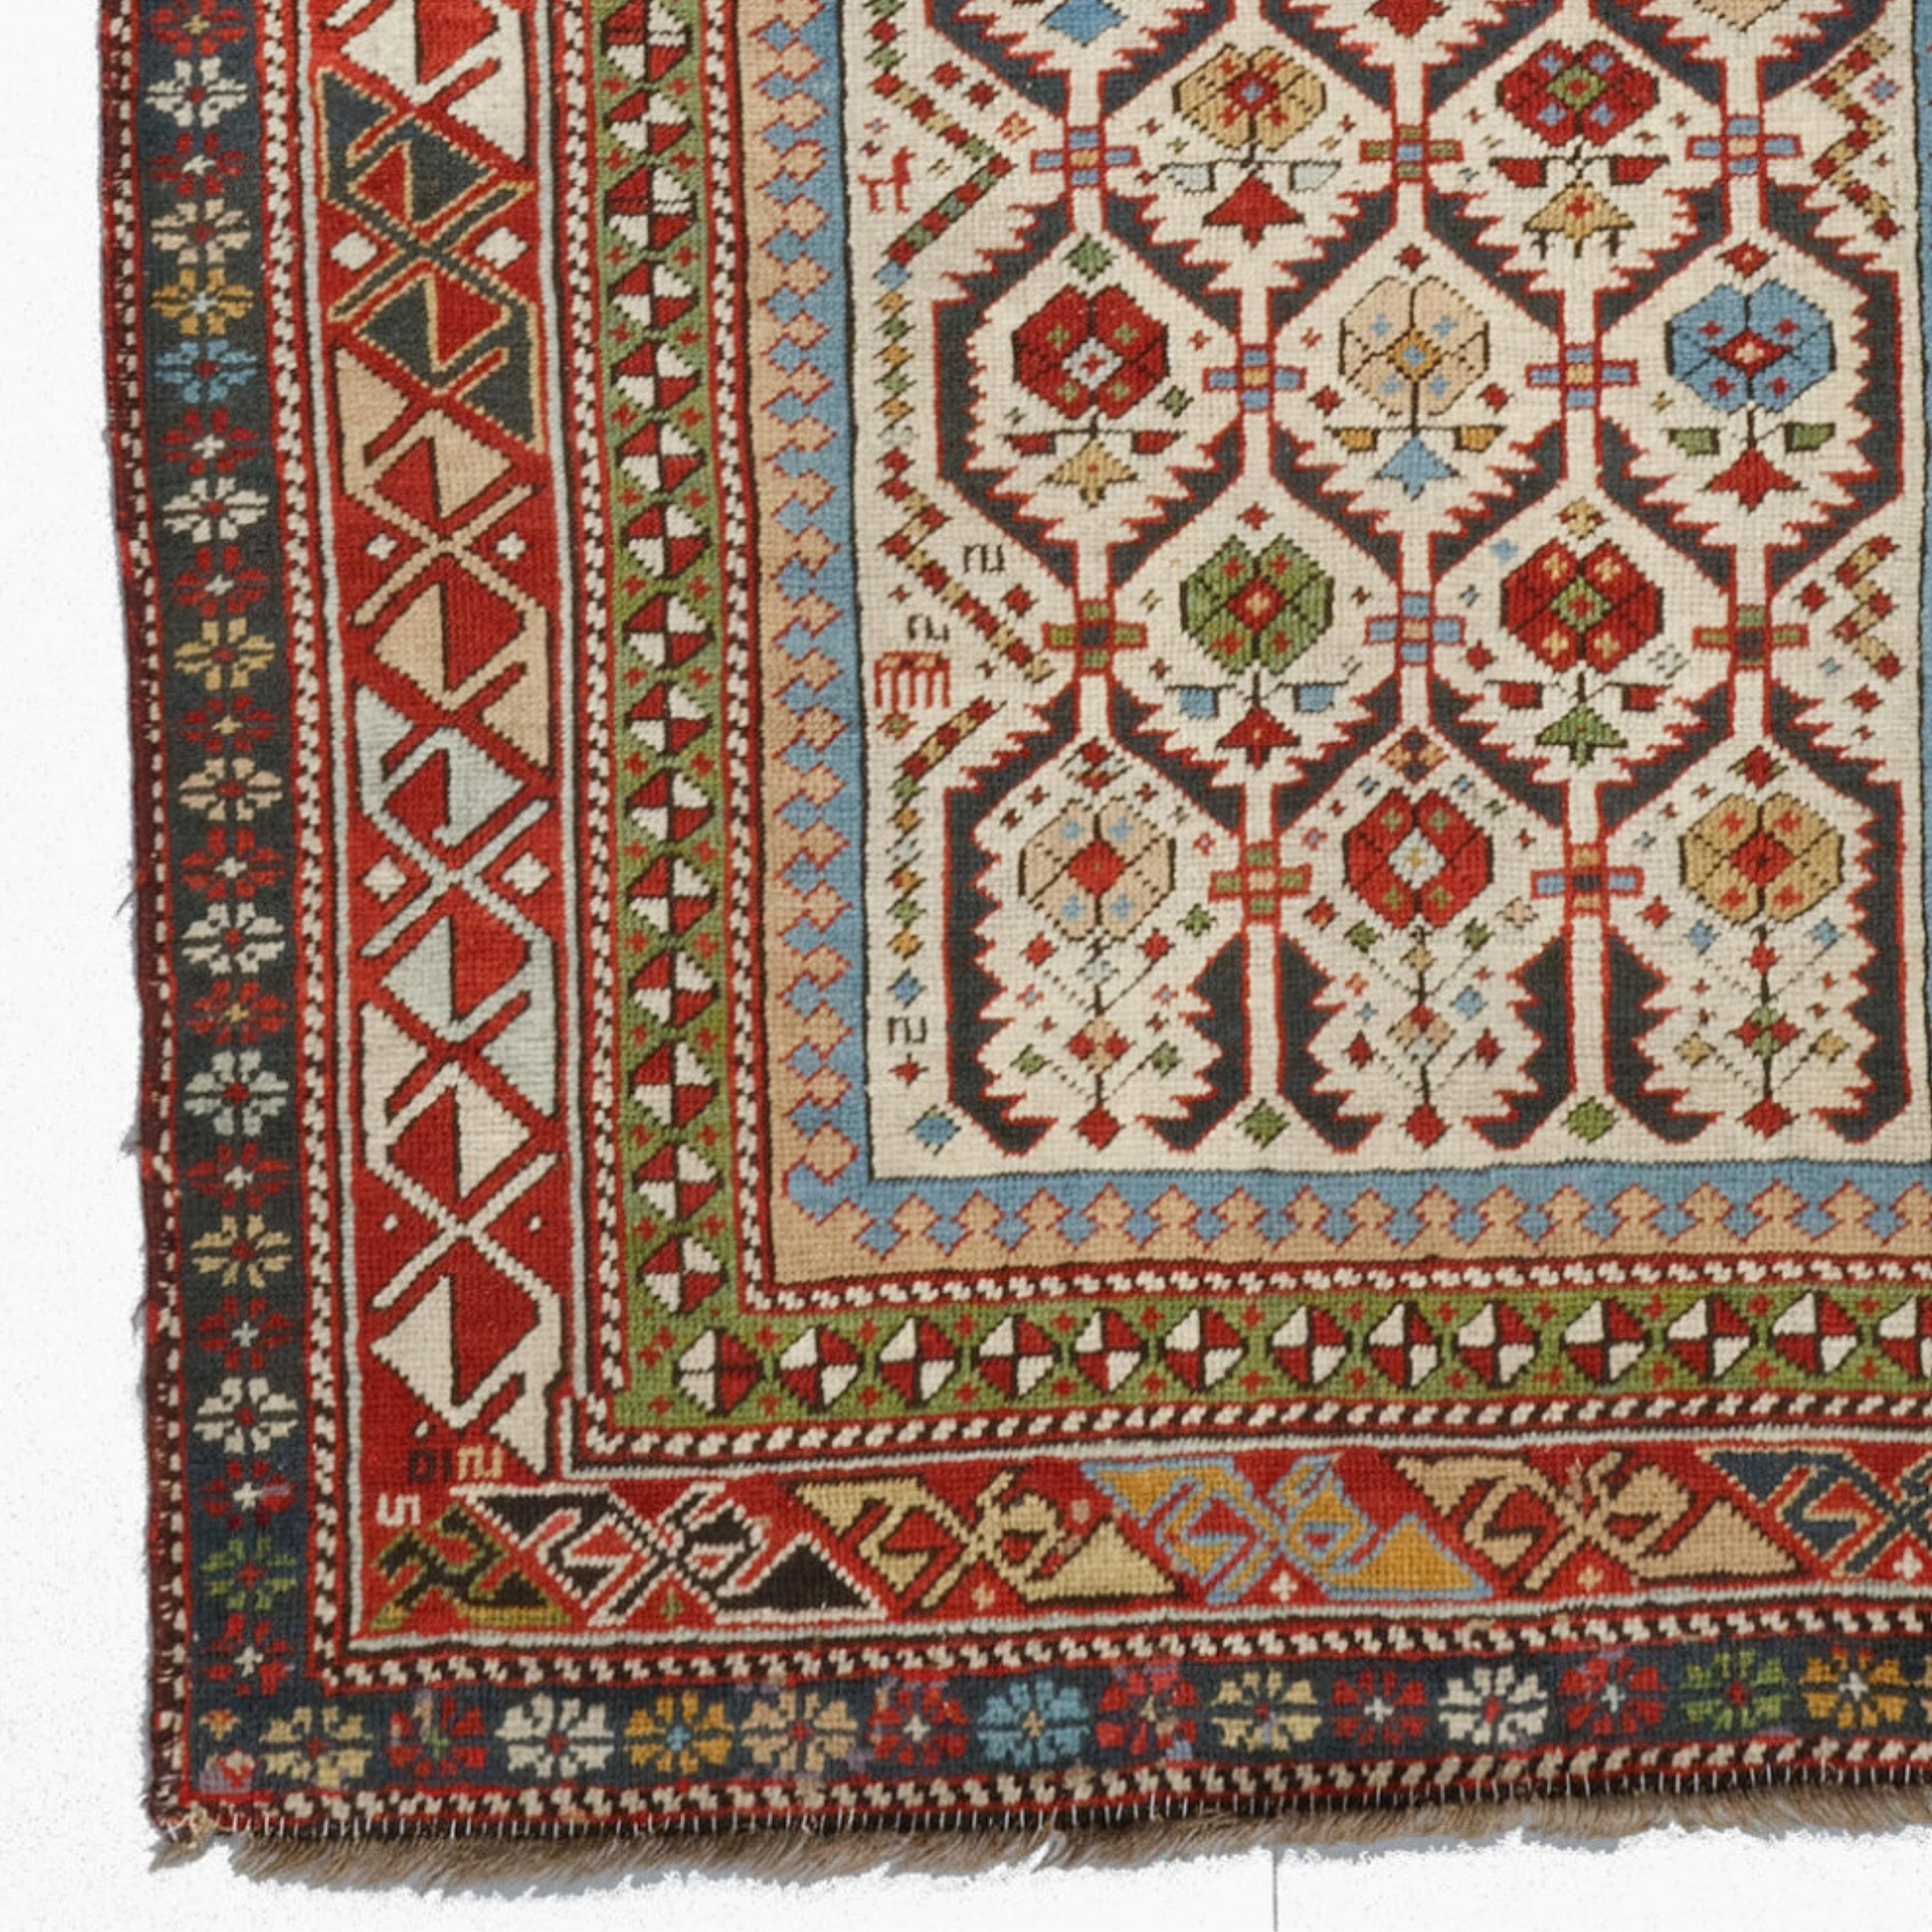 Antique Shirvan Prayer Rug
Late Of The 19th Century Caucasian Prayer Shirvan Rug. Generally Good Condition. Size 100 x 173 cm (39,3x68,1 In)

The Shirvan carpet is a handmade floor covering in the Shirvan region of Azerbaijan in the Southeastern